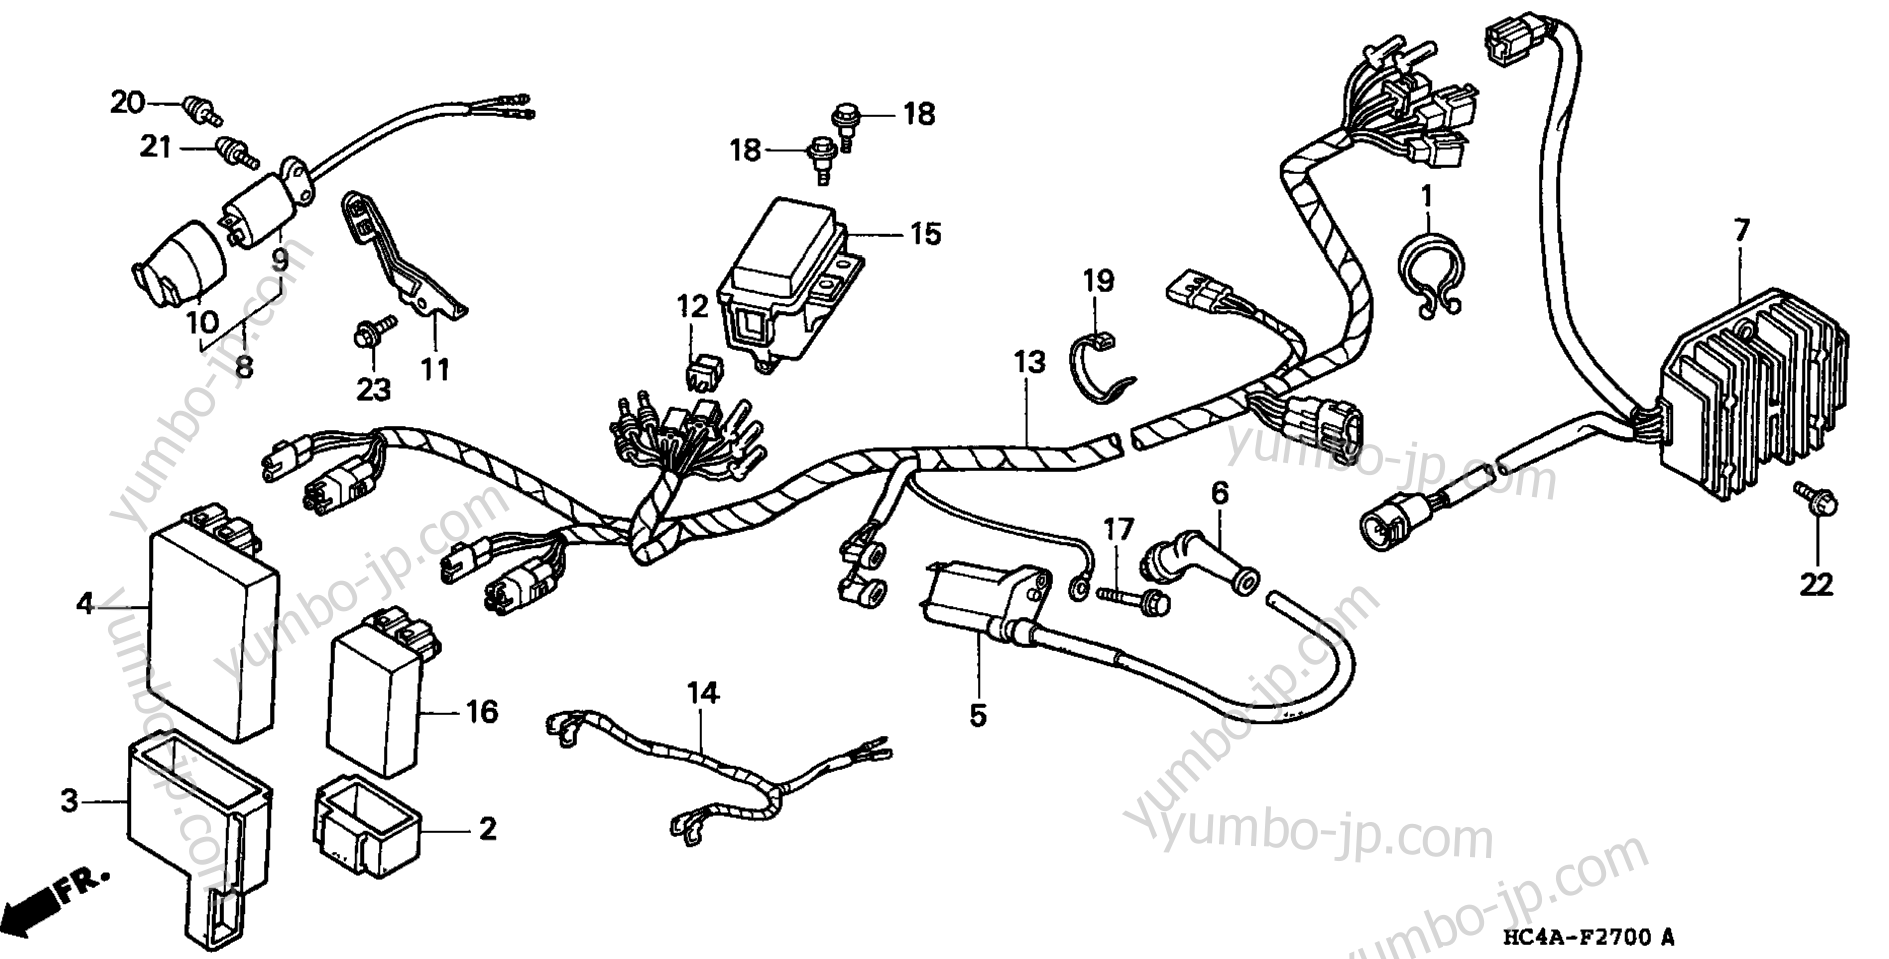 WIRE HARNESS for ATVs HONDA TRX300FW AN 1993 year